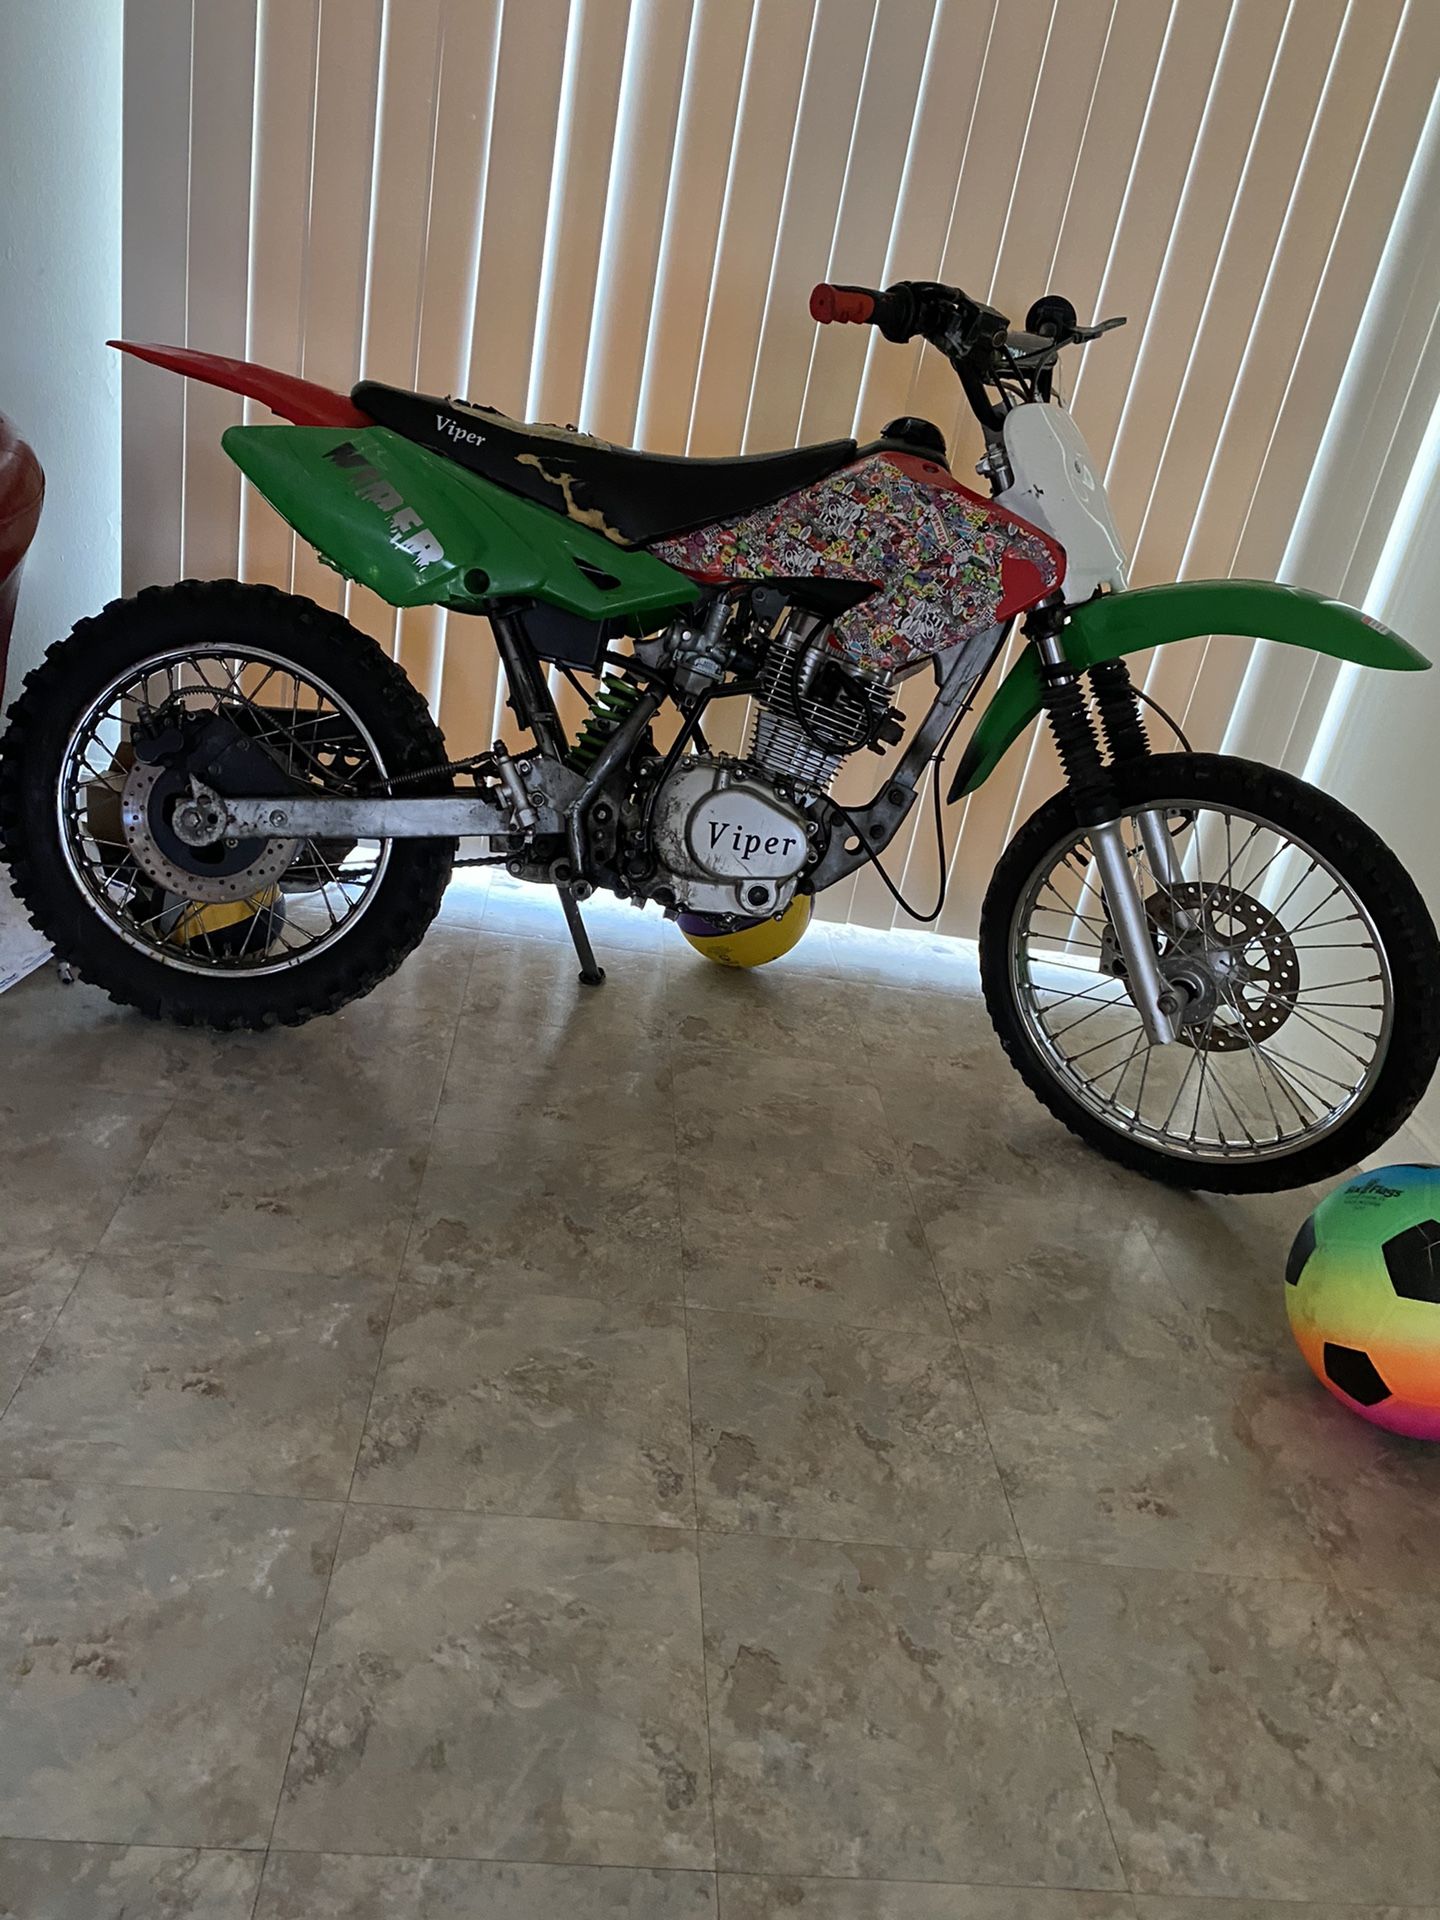 150 Cc 4 Stroke 5 Speed Manual Viper Dirt bike Have Parts Need In Hand $700